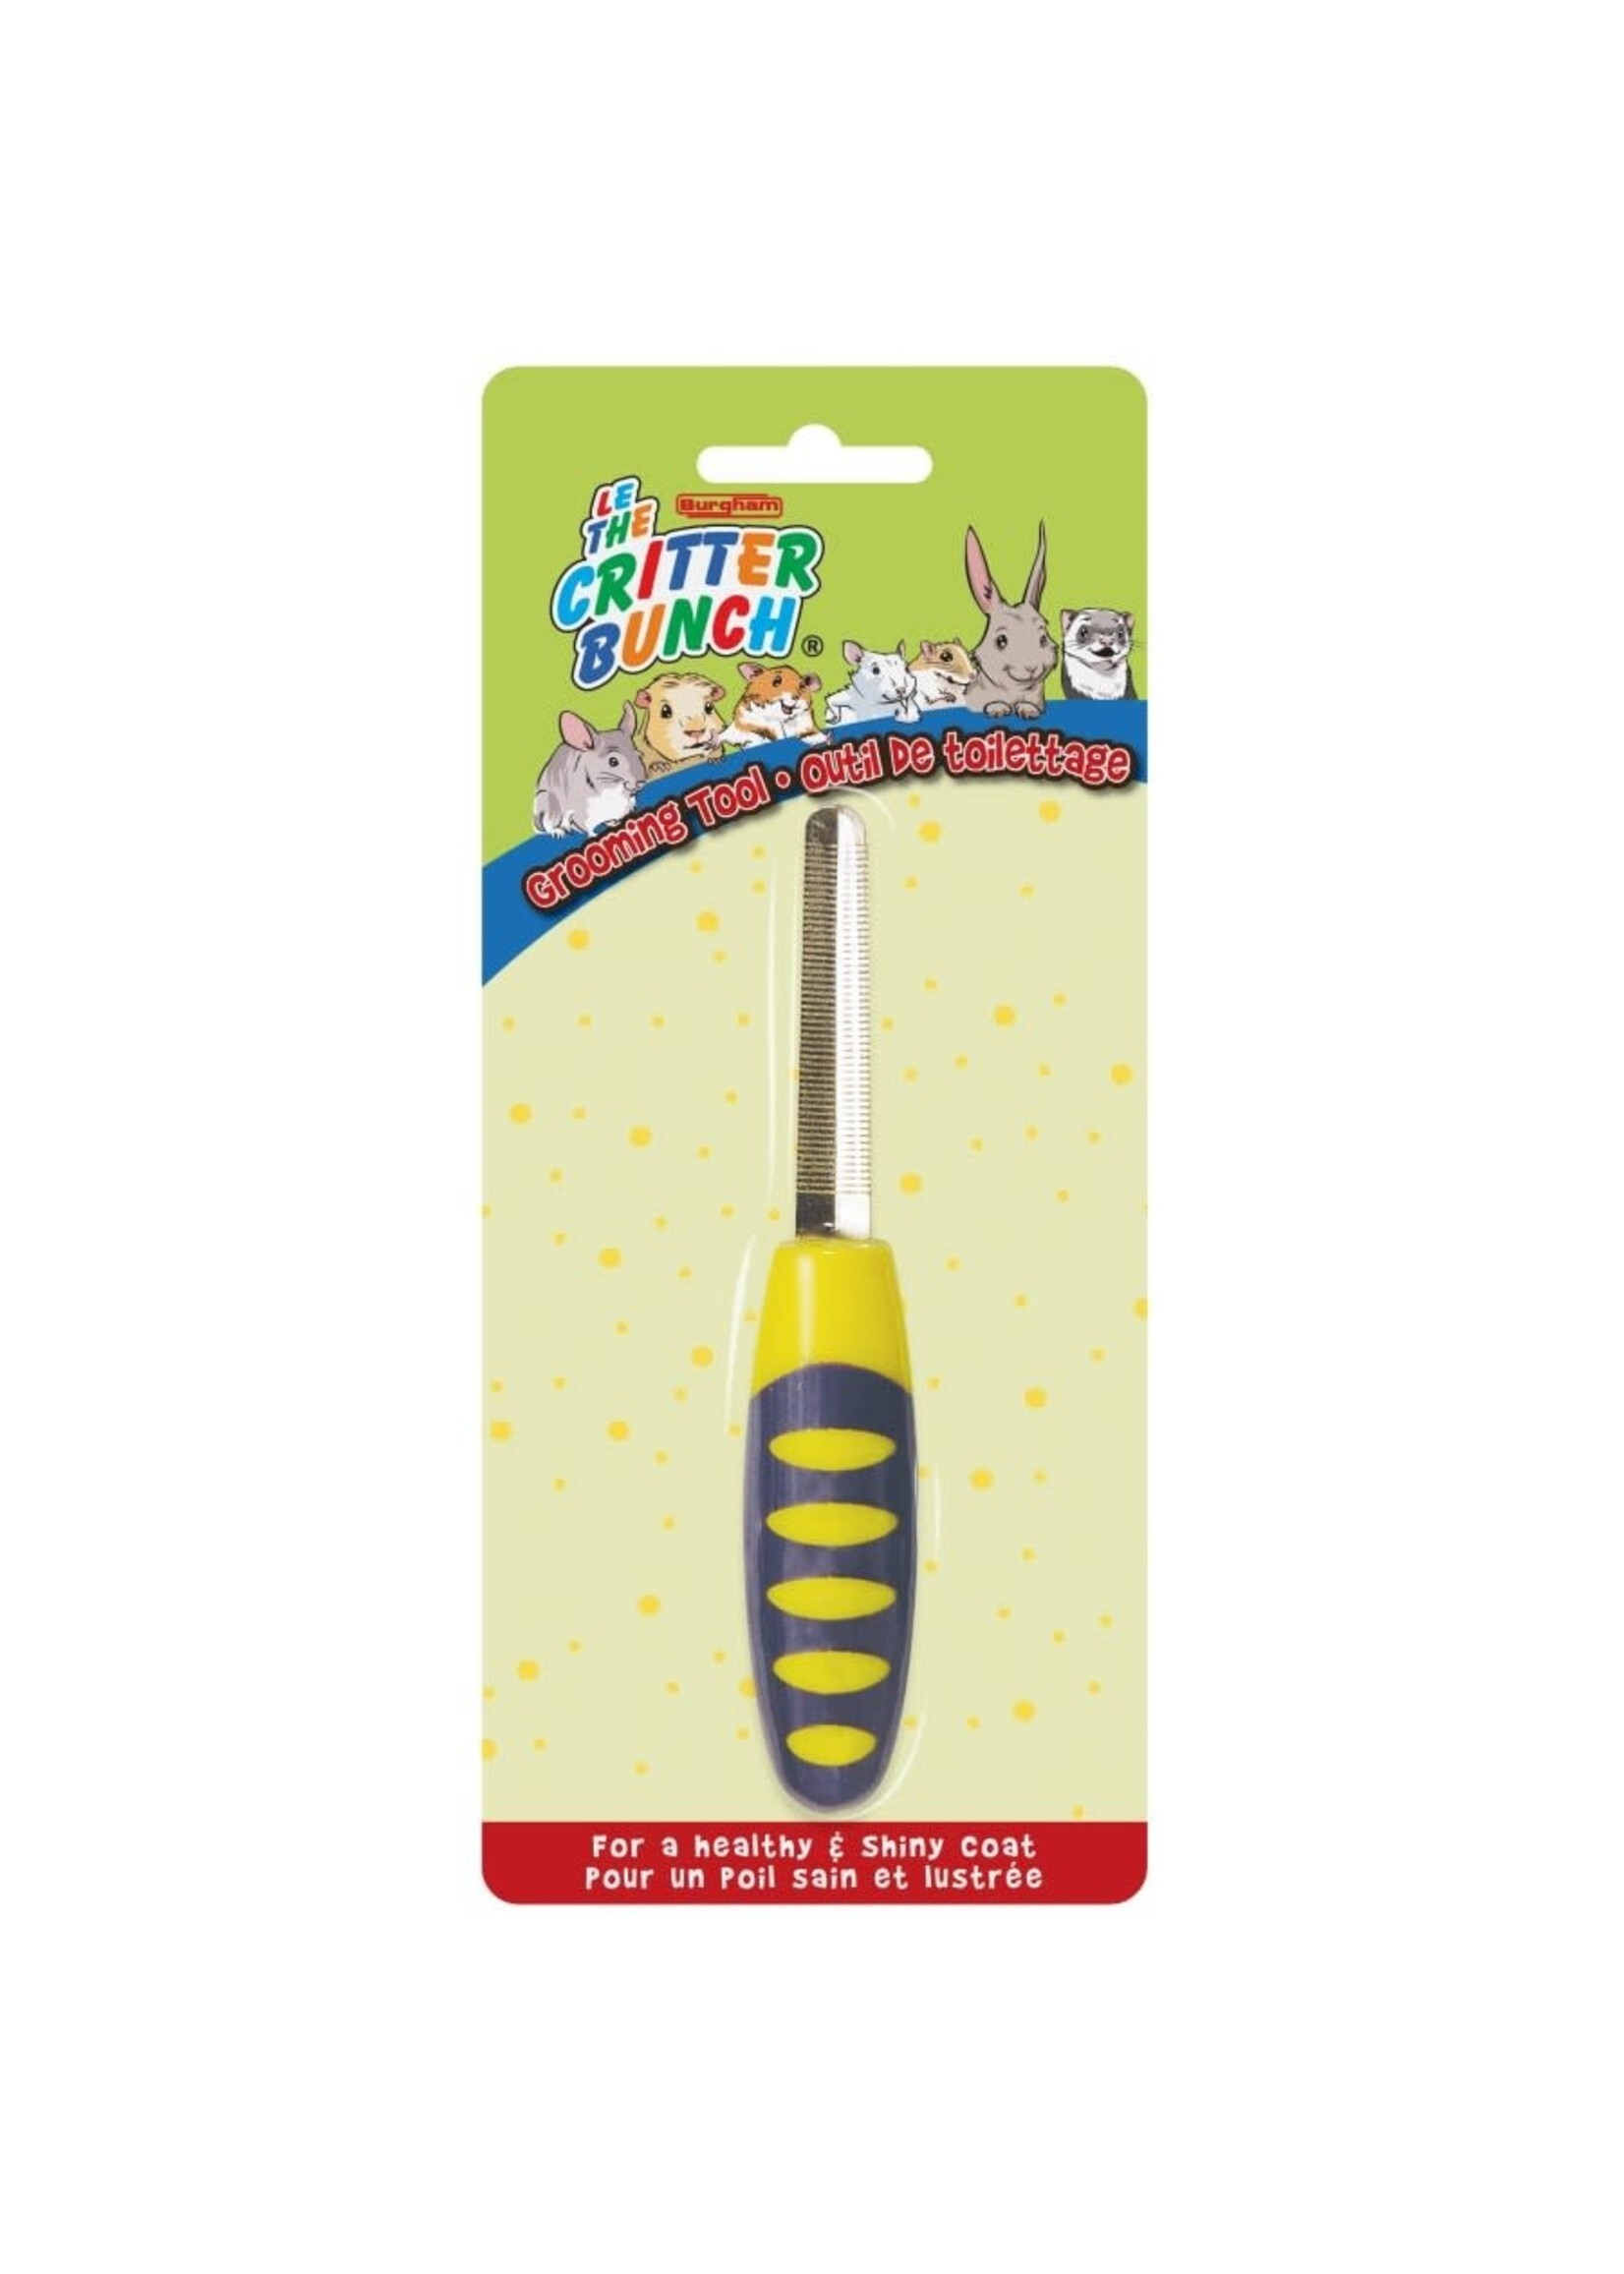 The Critter Bunch Nail File 5"